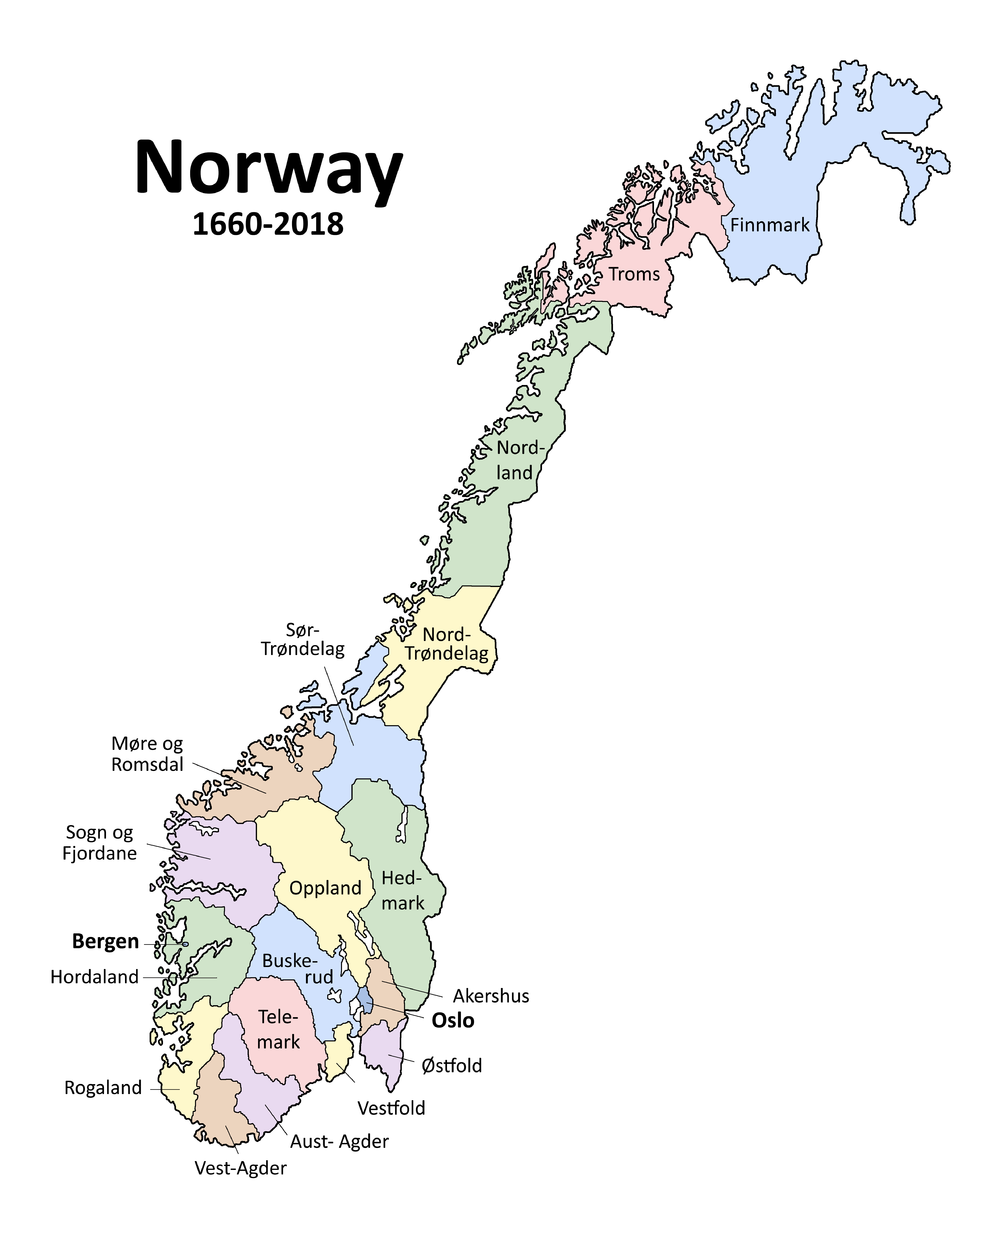 Norway Guided Research Map.png